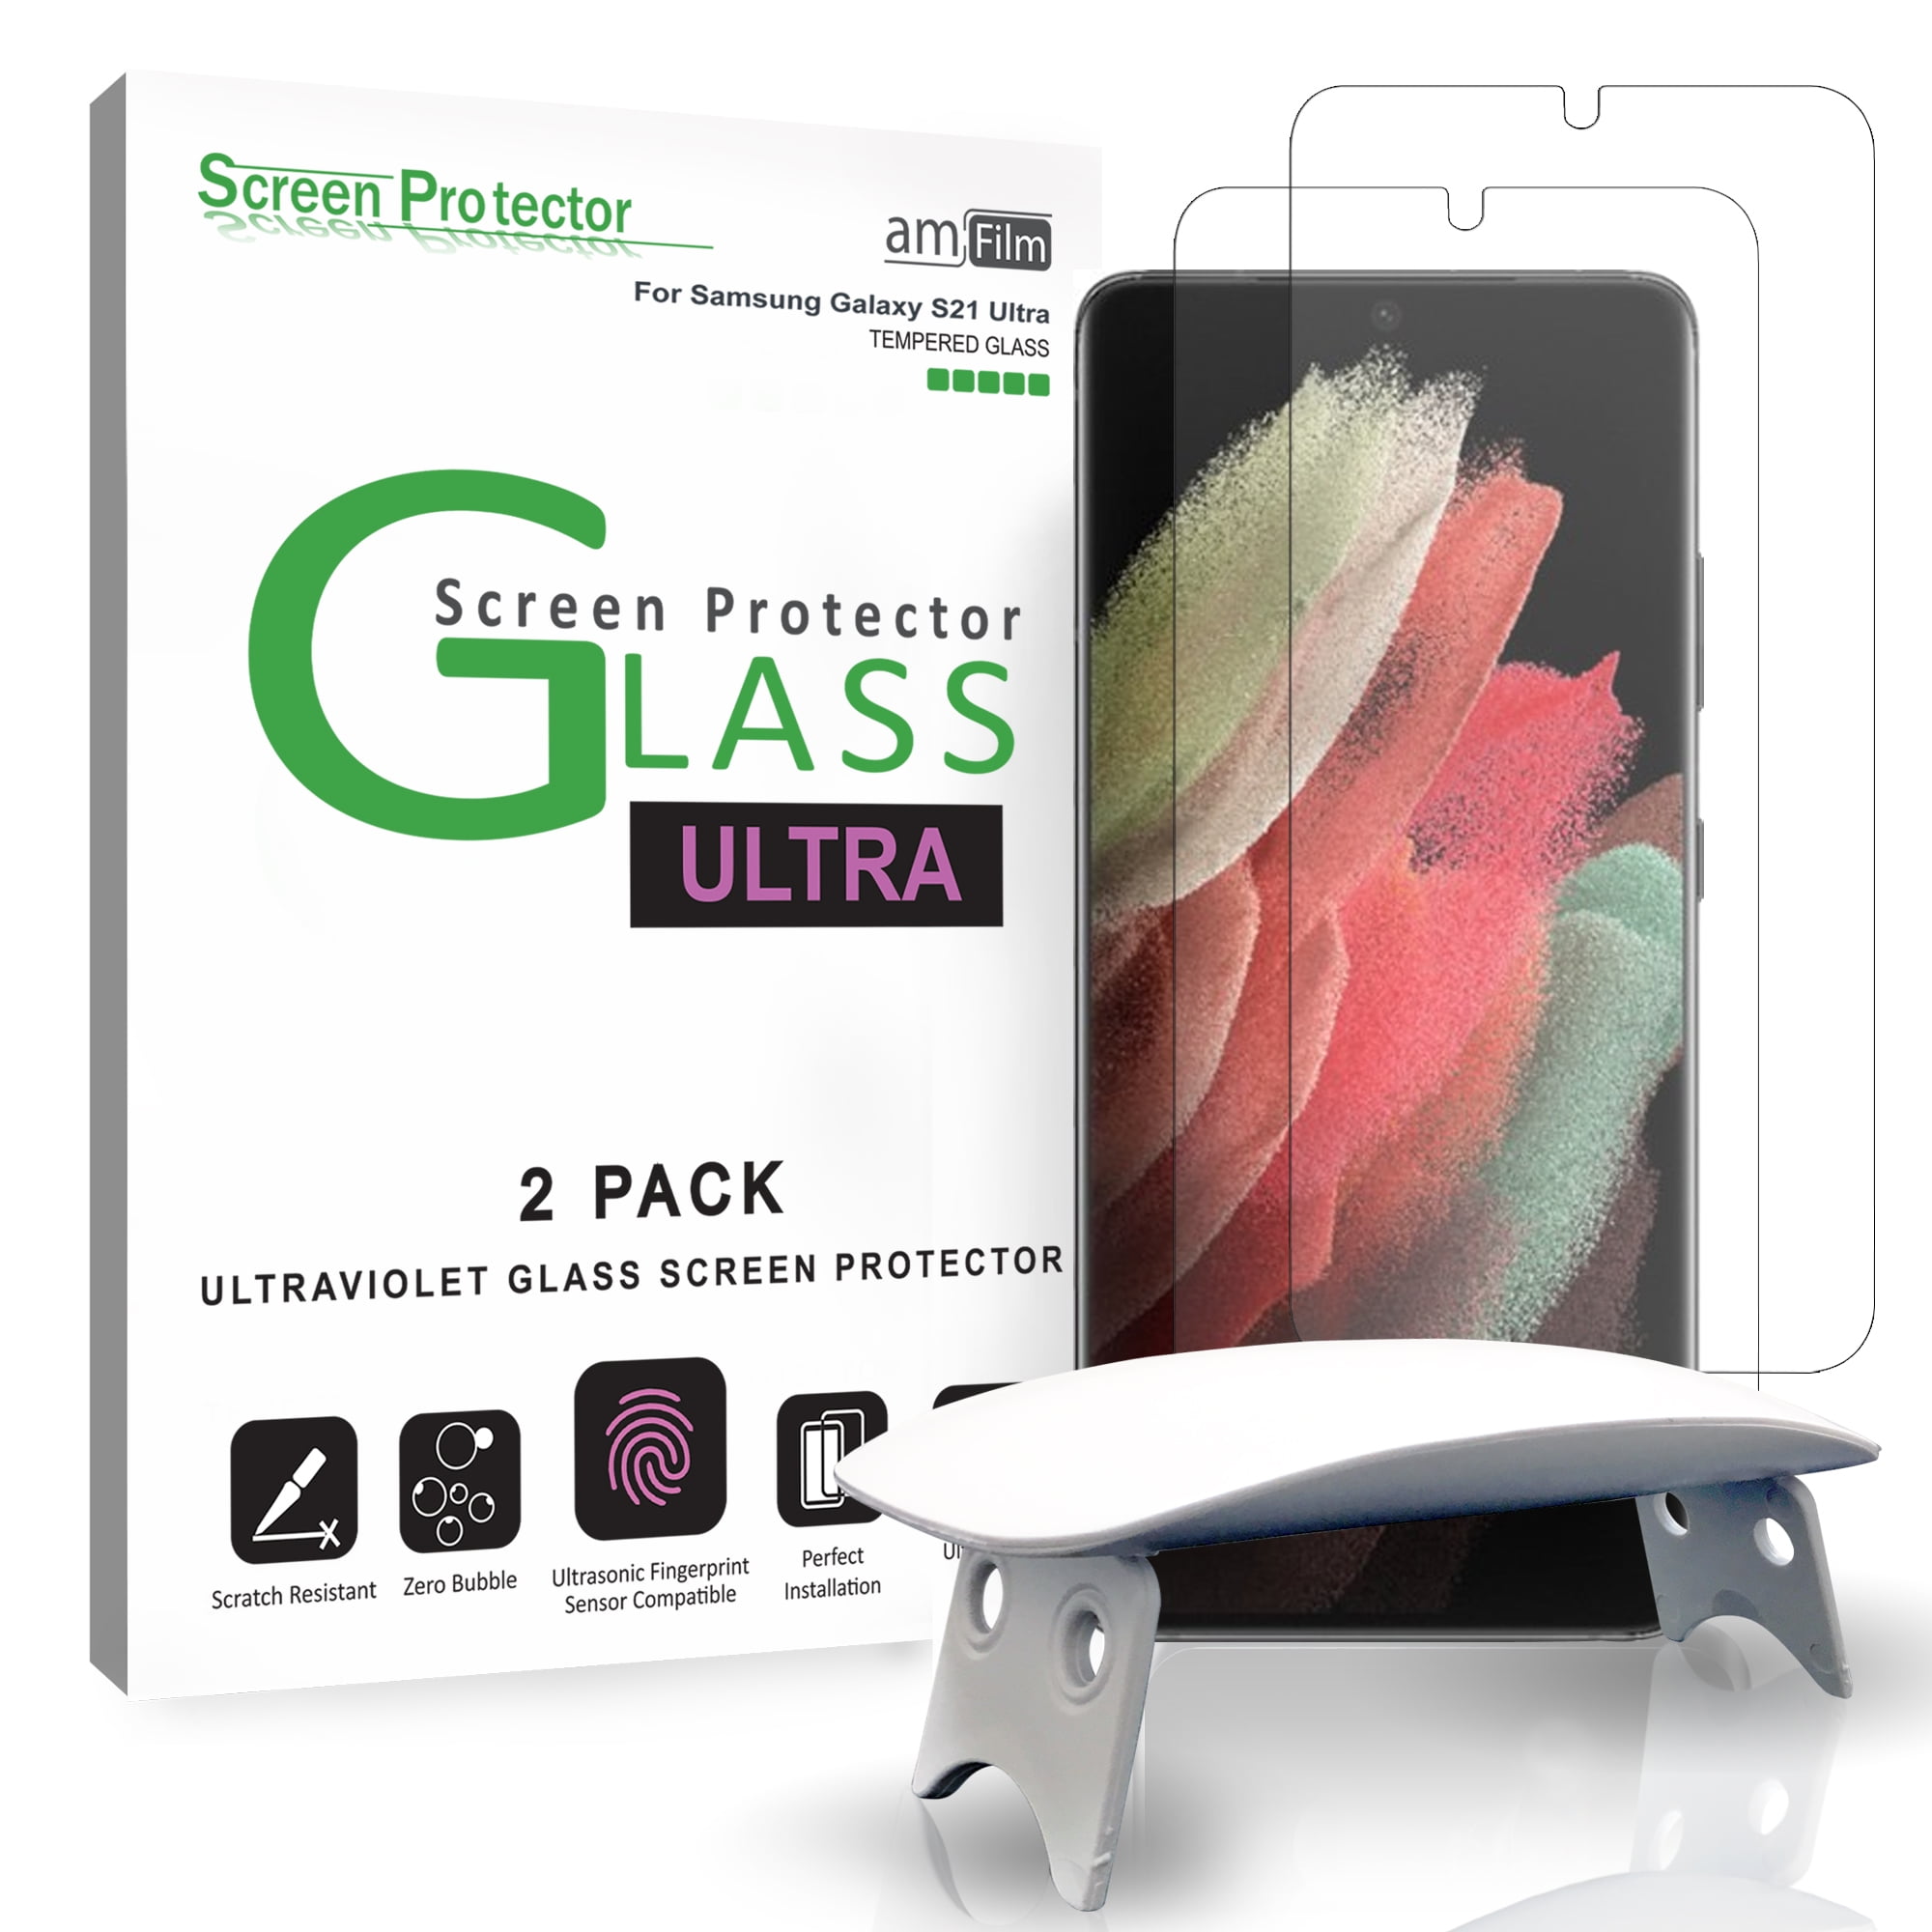 Galaxy S21 Ultra Screen Protector 9H Tempered Glass Scratch Resistant for Samsung Galaxy S21 Ultra 5G 3D HD Curved Ultrasonic Fingerprint Support 6.8 Screen Protector 2+2 Pack Bubble Free 